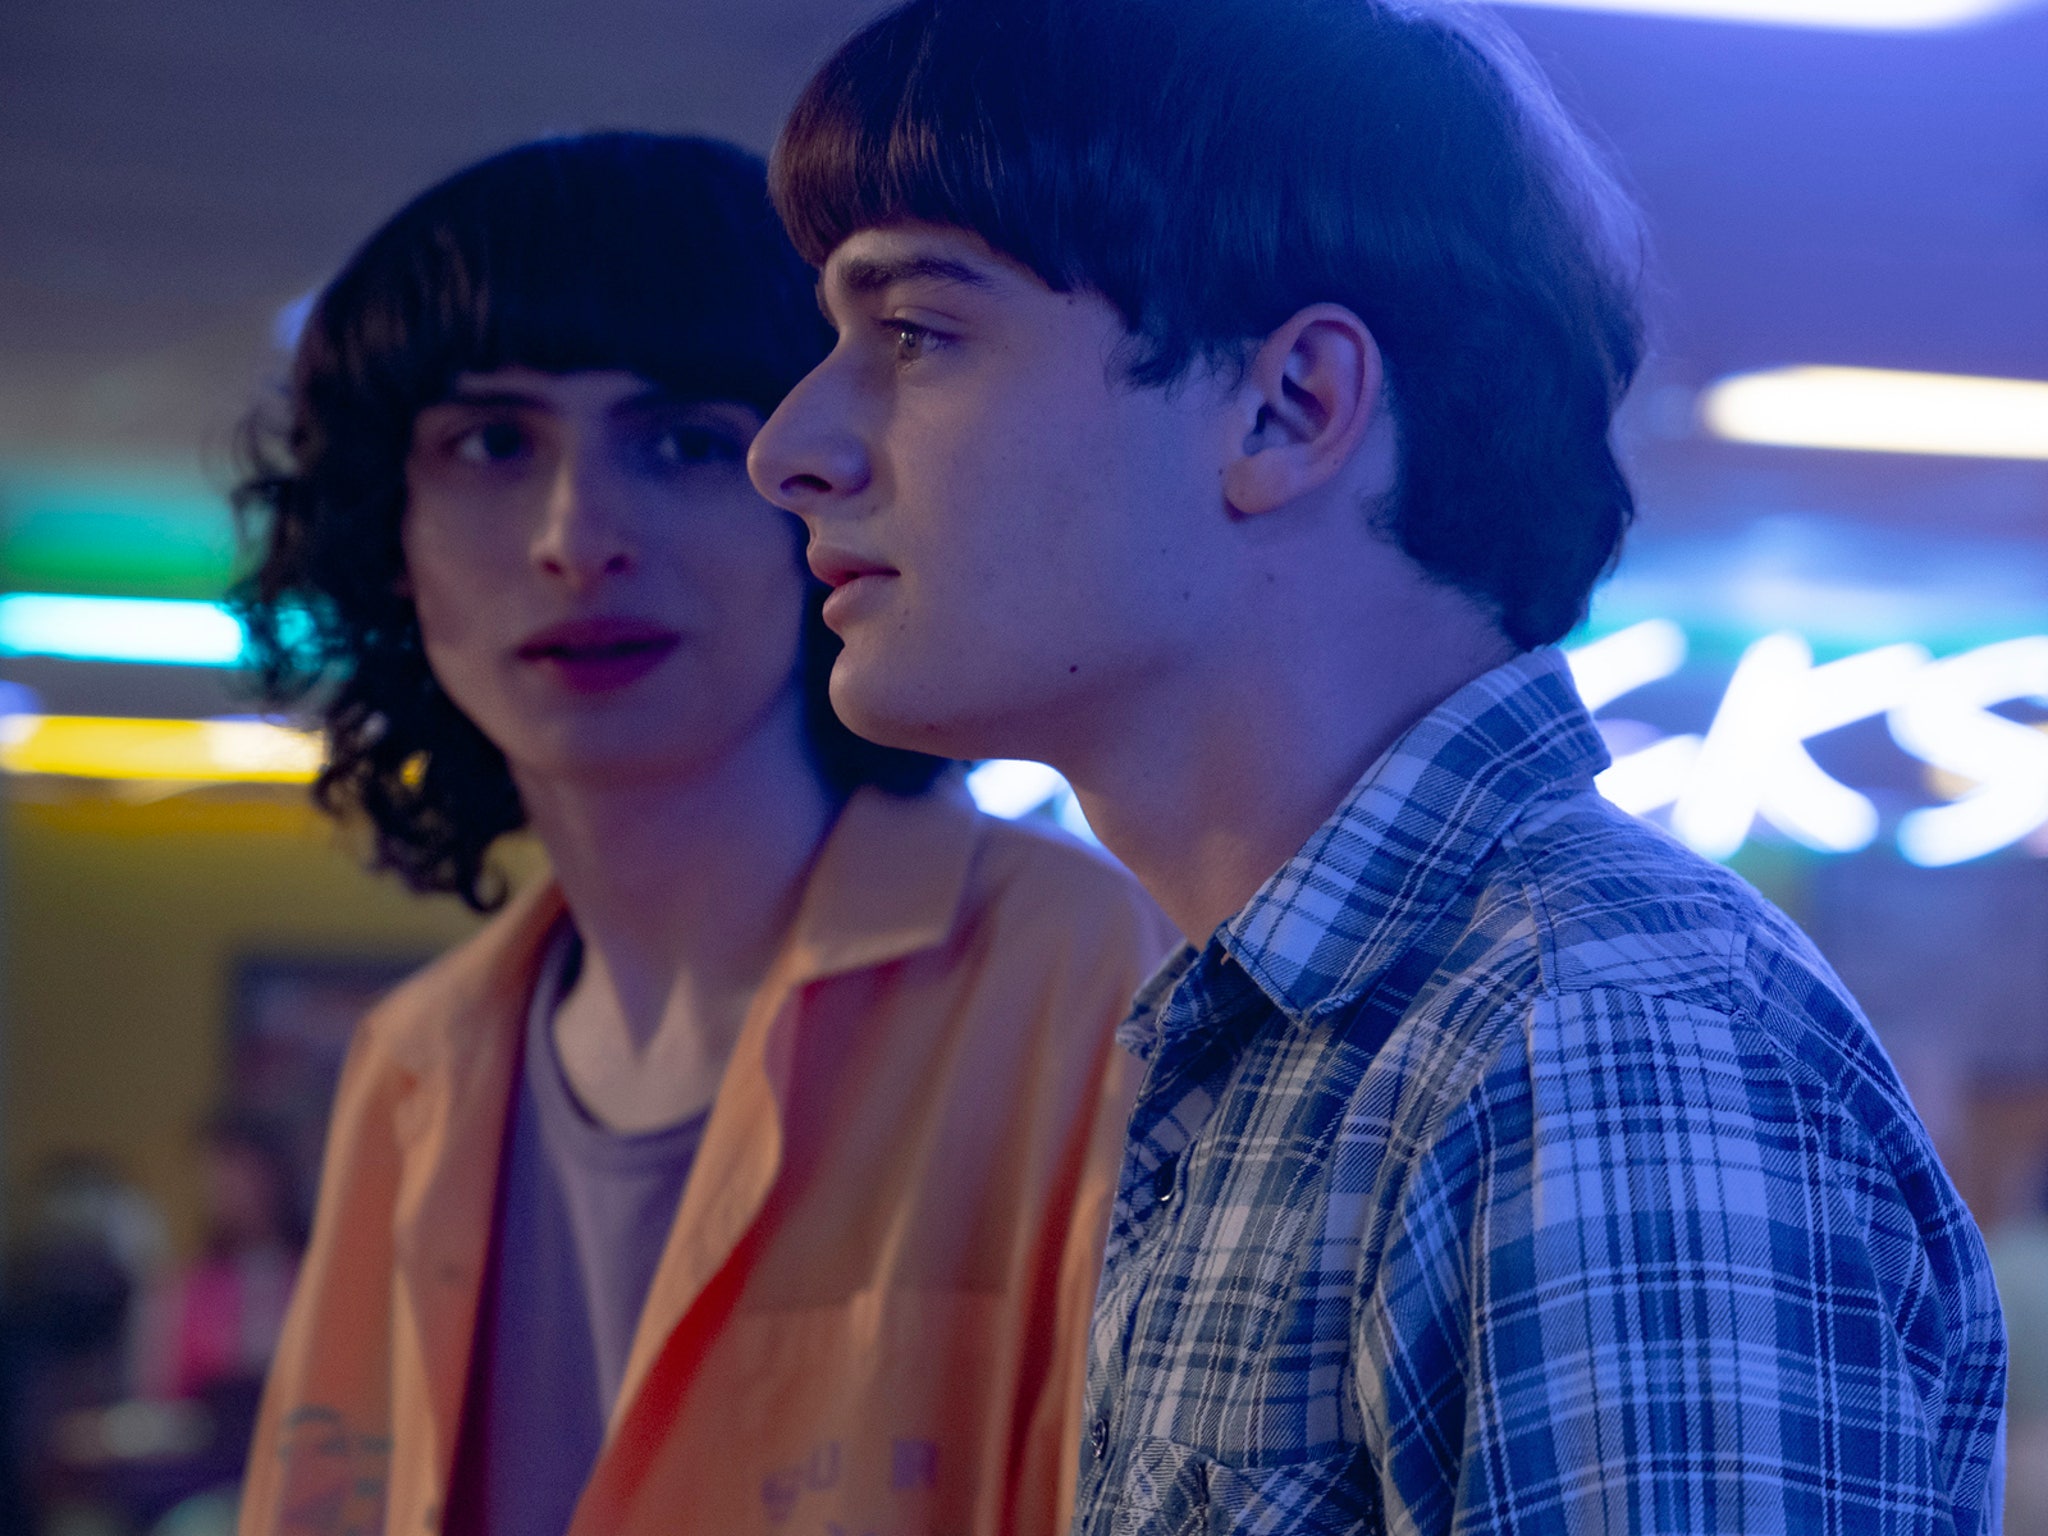 The Significance of Will's Sexuality in Stranger Things